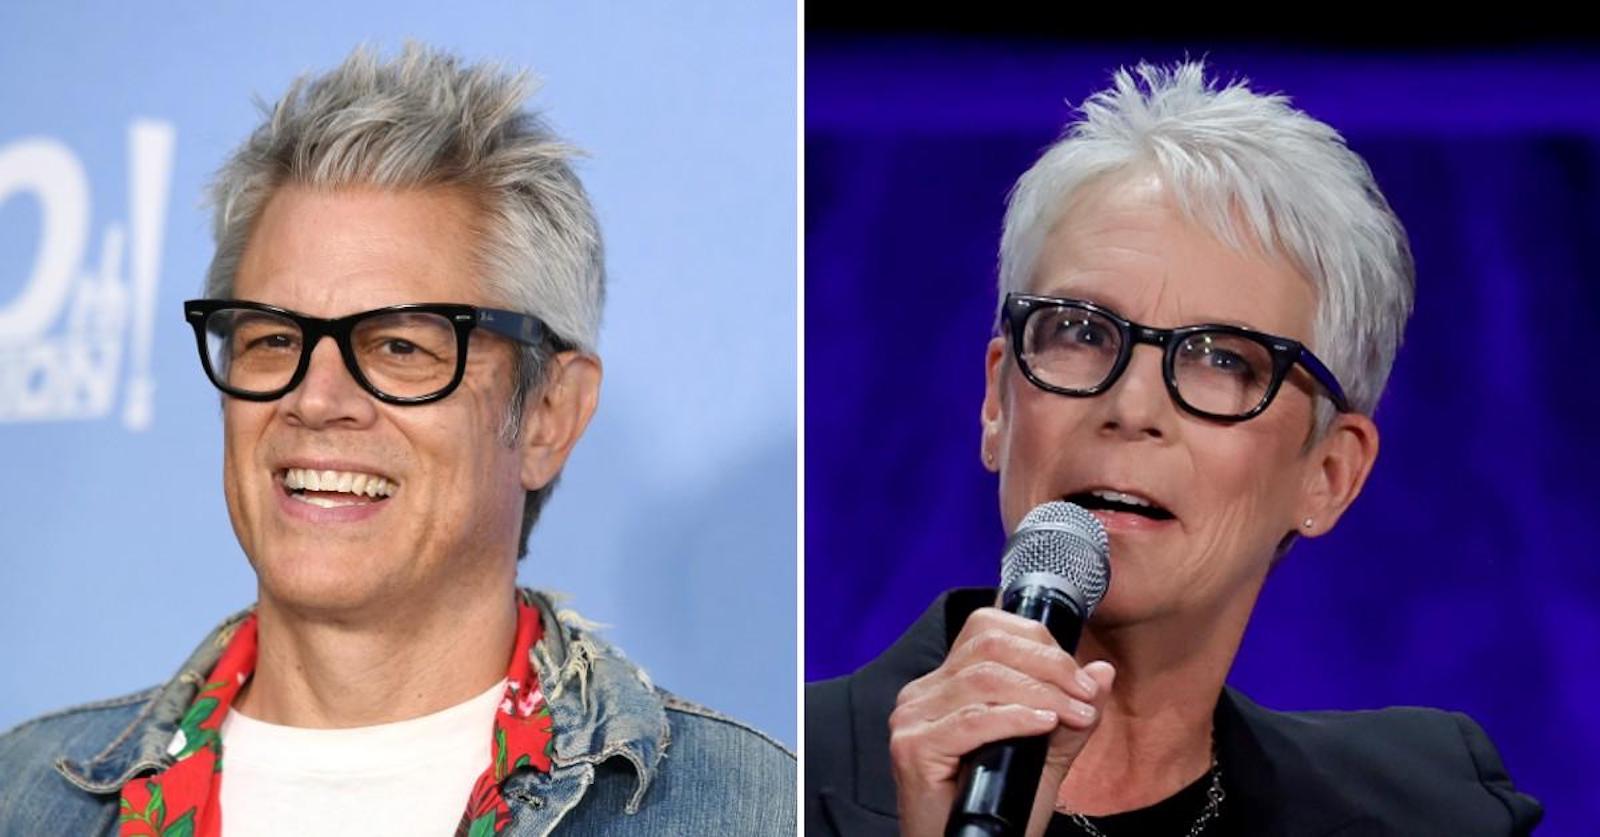 Johnny Knoxville Admits: 'With White Hair I'm Just Jamie Lee Curtis'